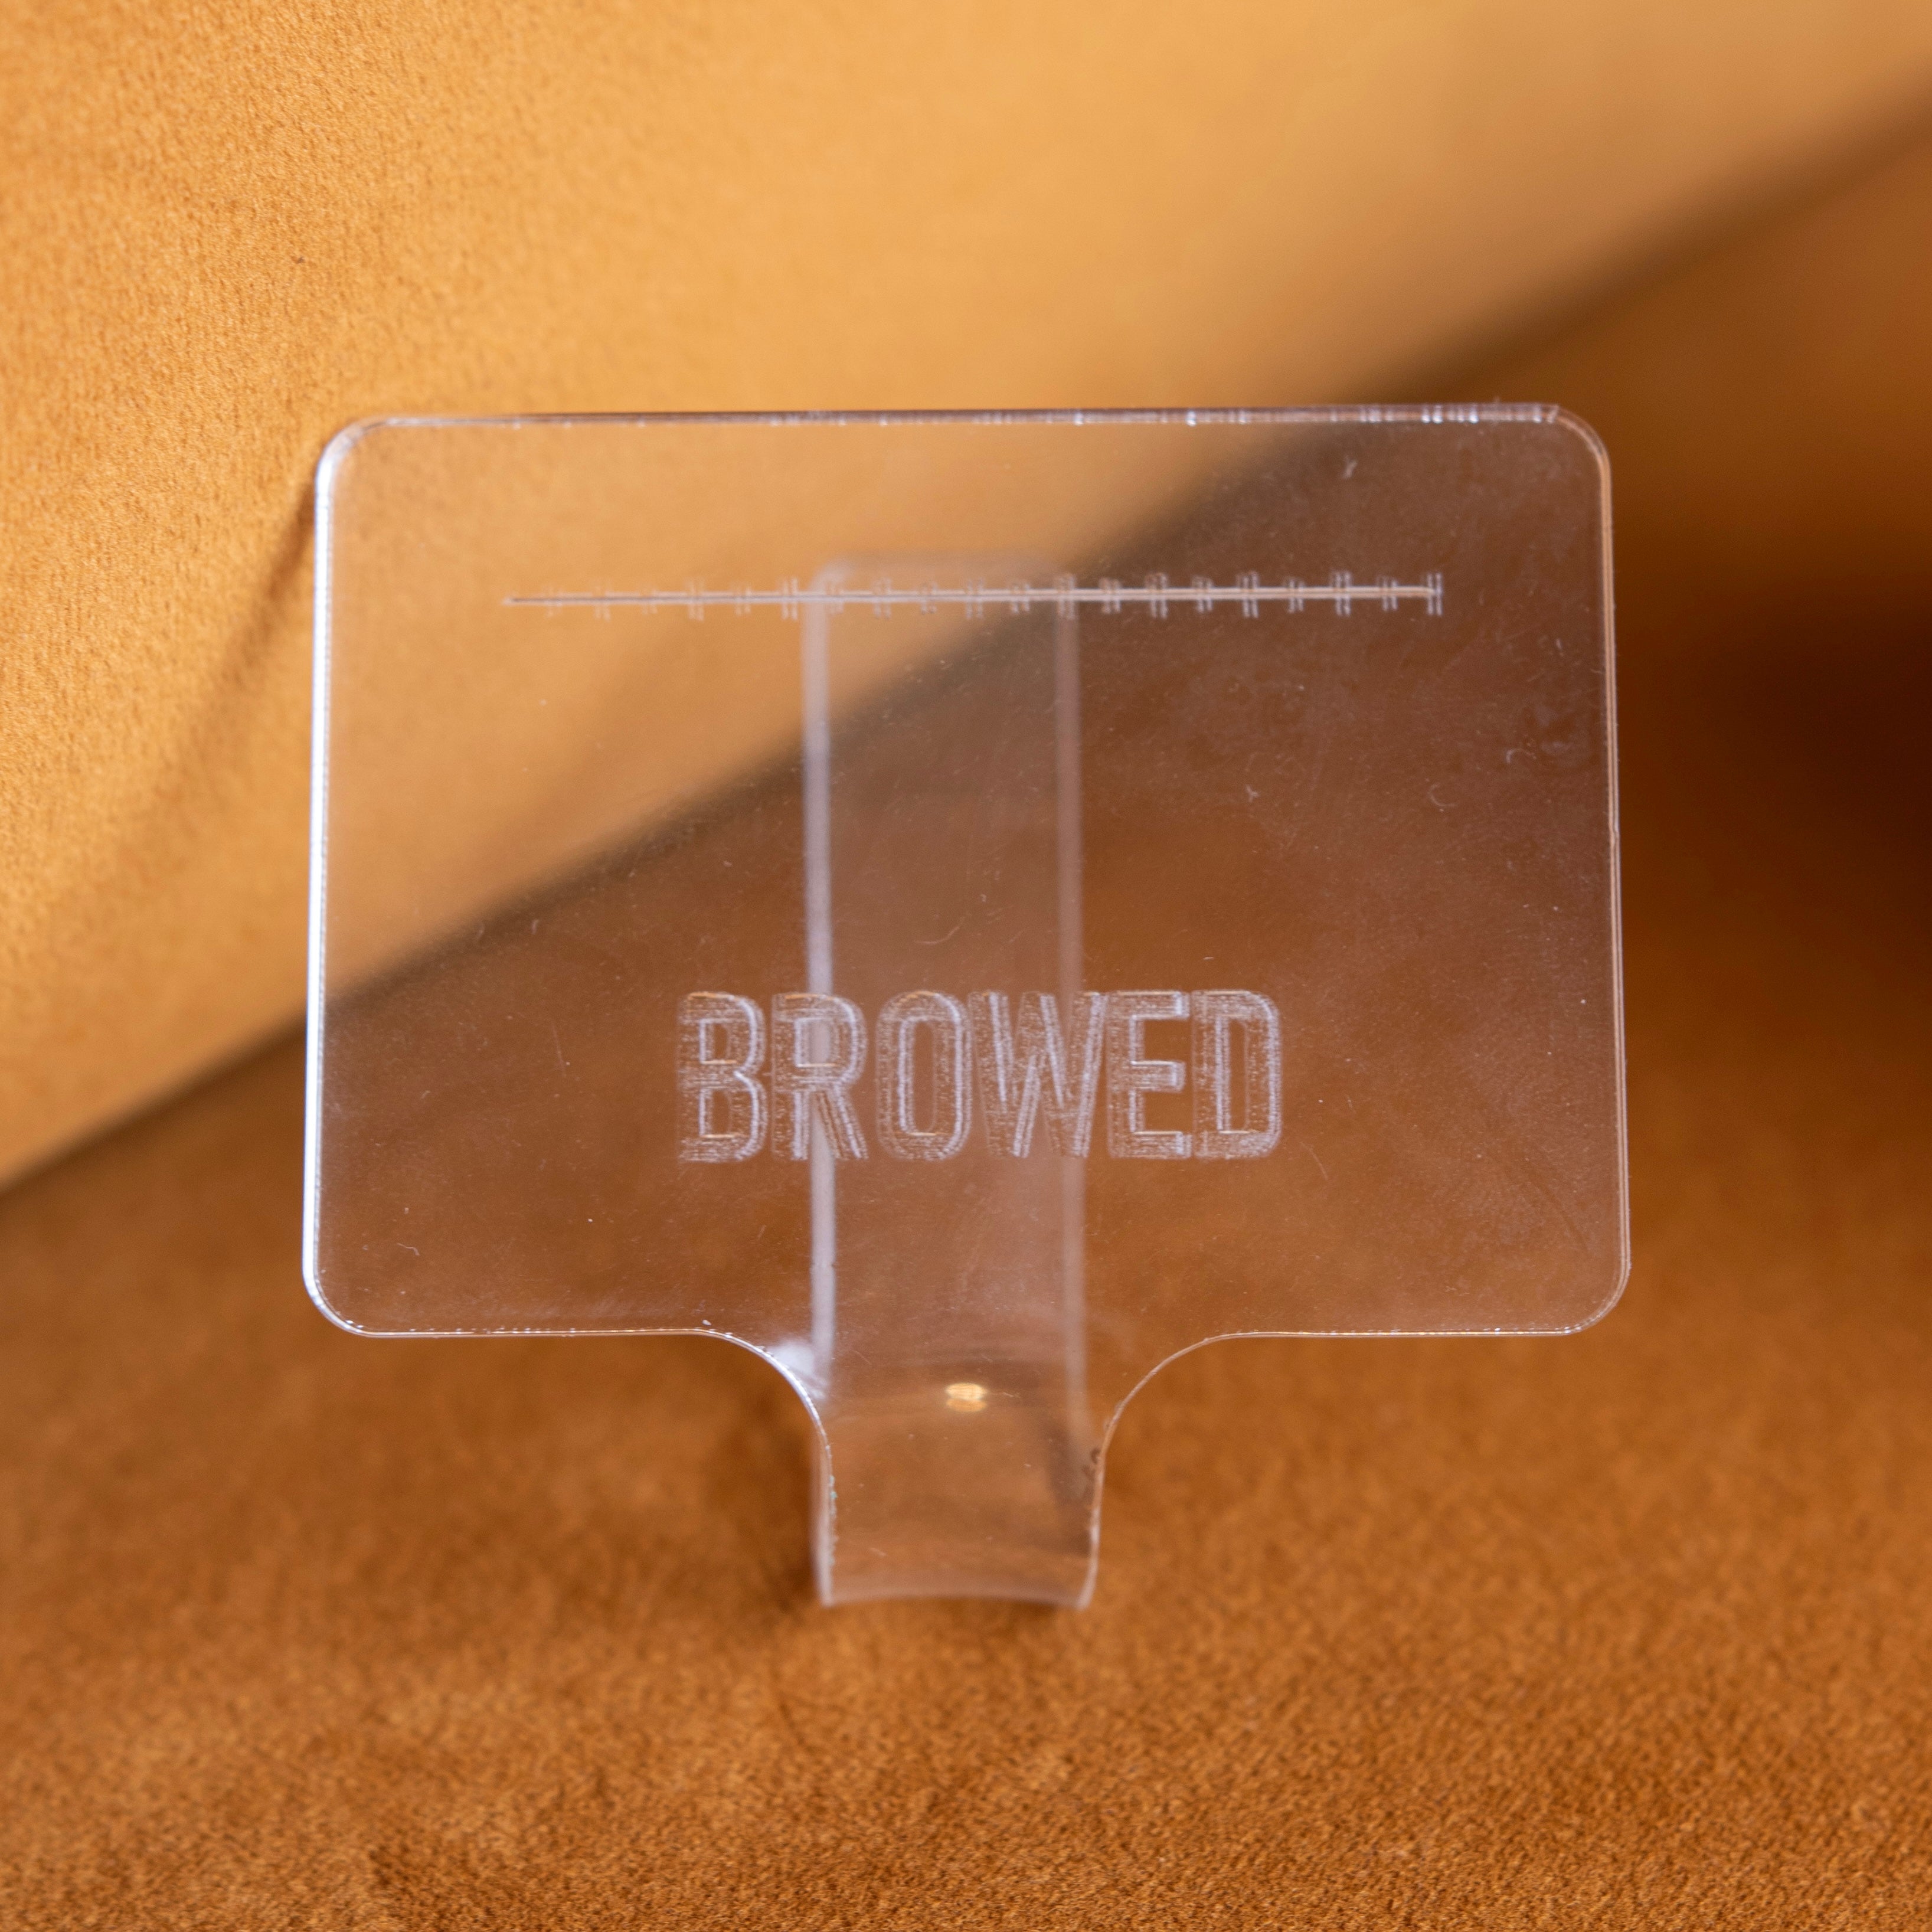 BROWED - Brow Palette for colour mixing